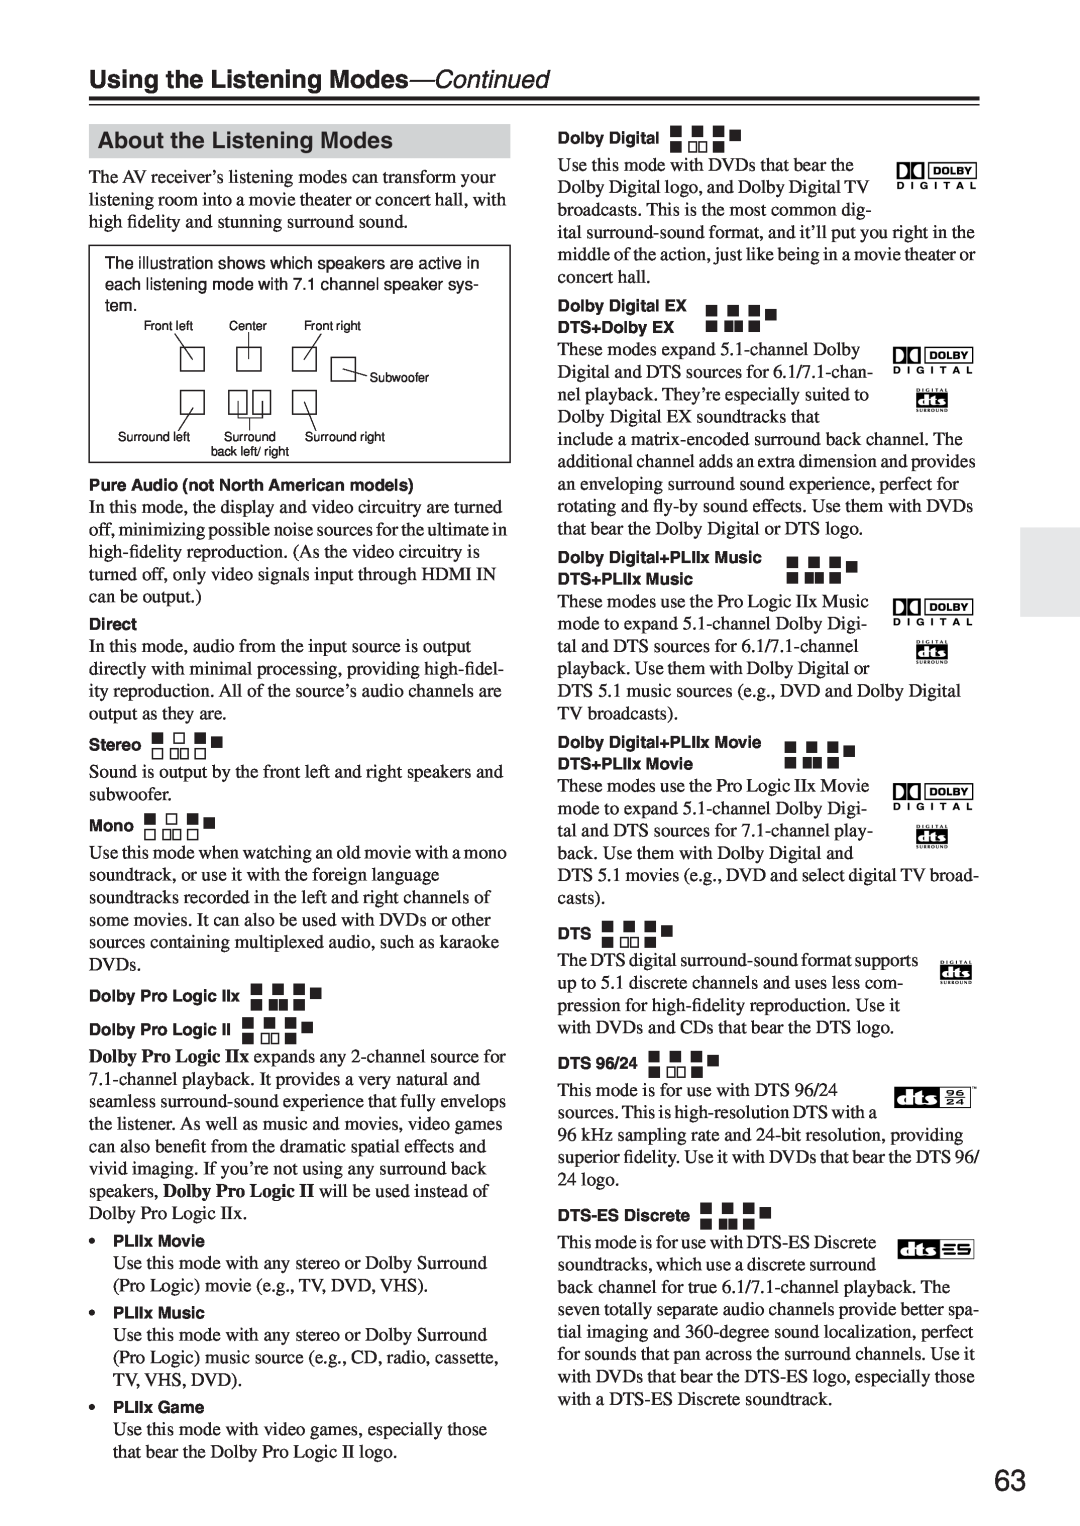 Onkyo TX-SR674/674E, TX-SR604/604E instruction manual About the Listening Modes, Using the Listening Modes—Continued 